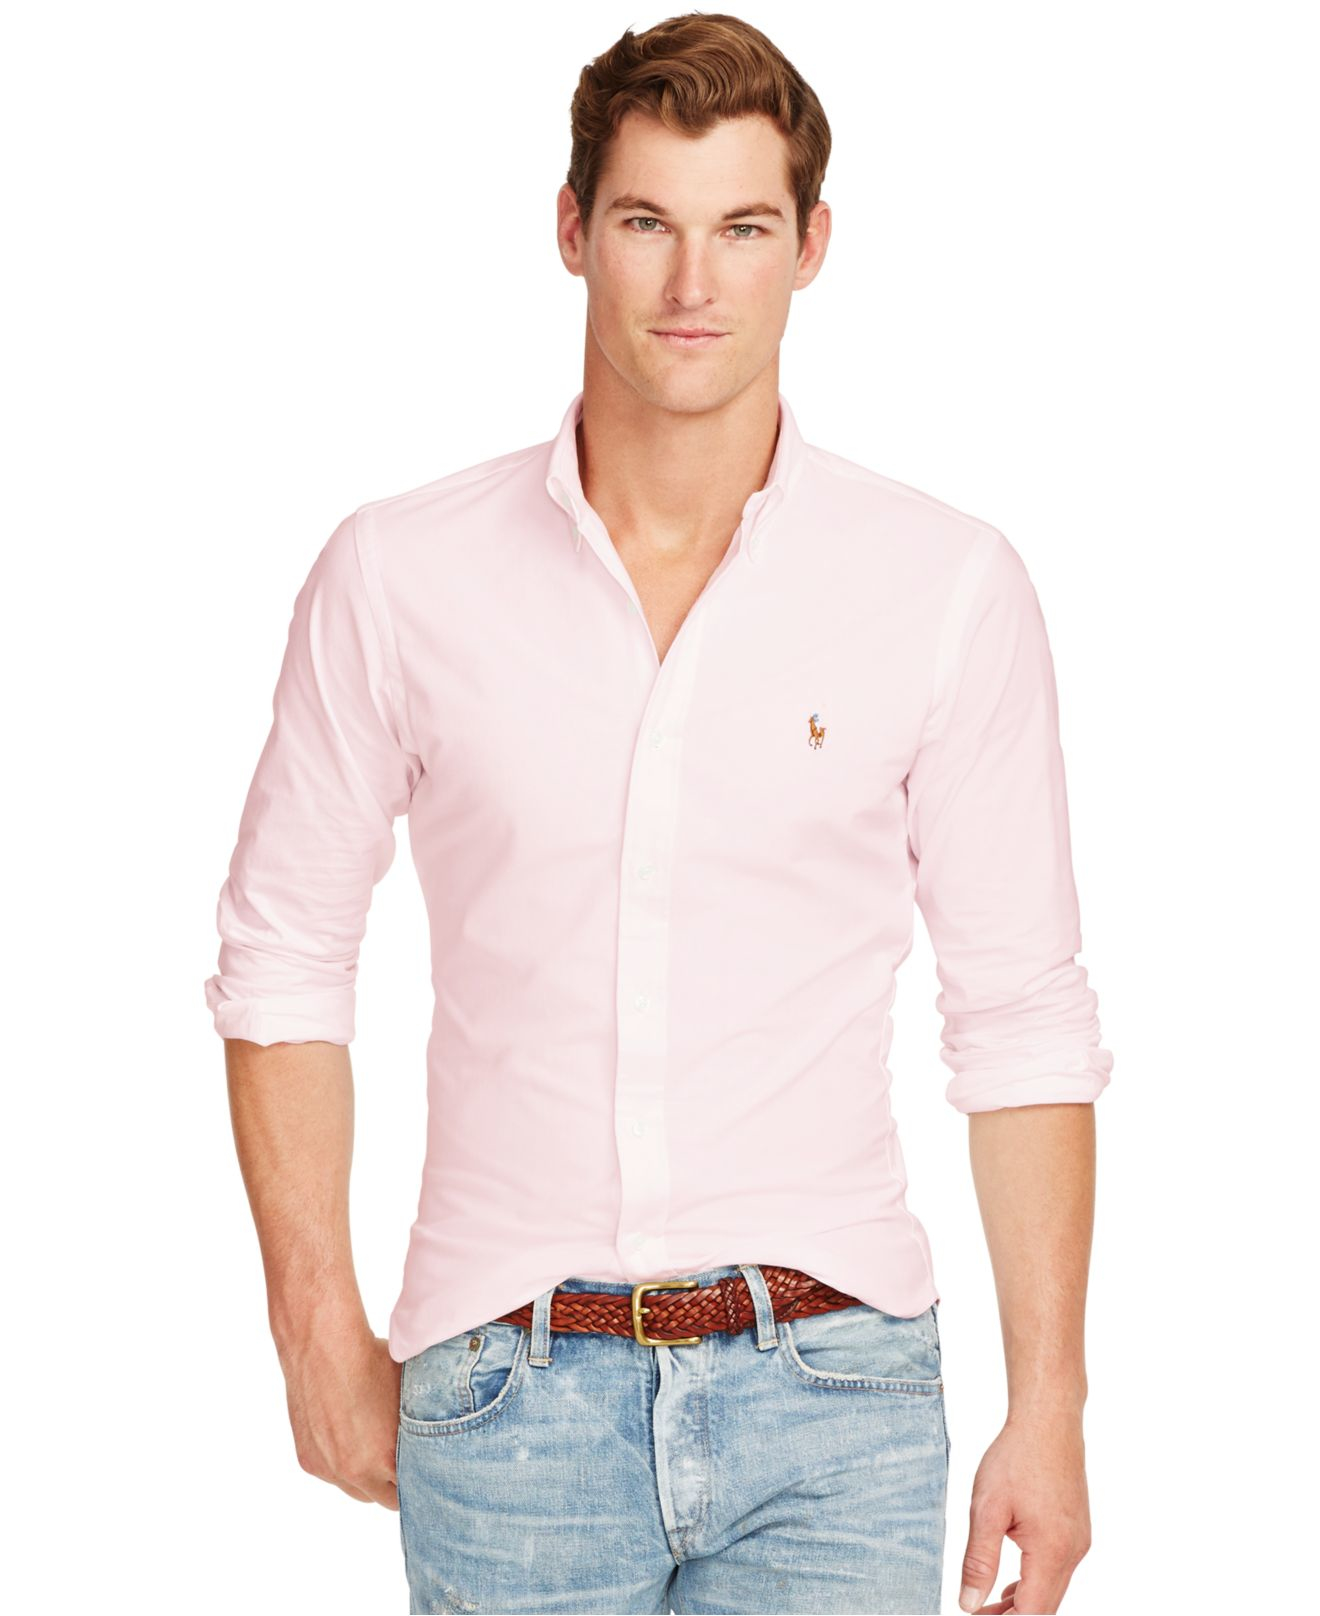 Lyst - Polo Ralph Lauren Slim-fit Stretch-oxford Shirt in Pink for Men